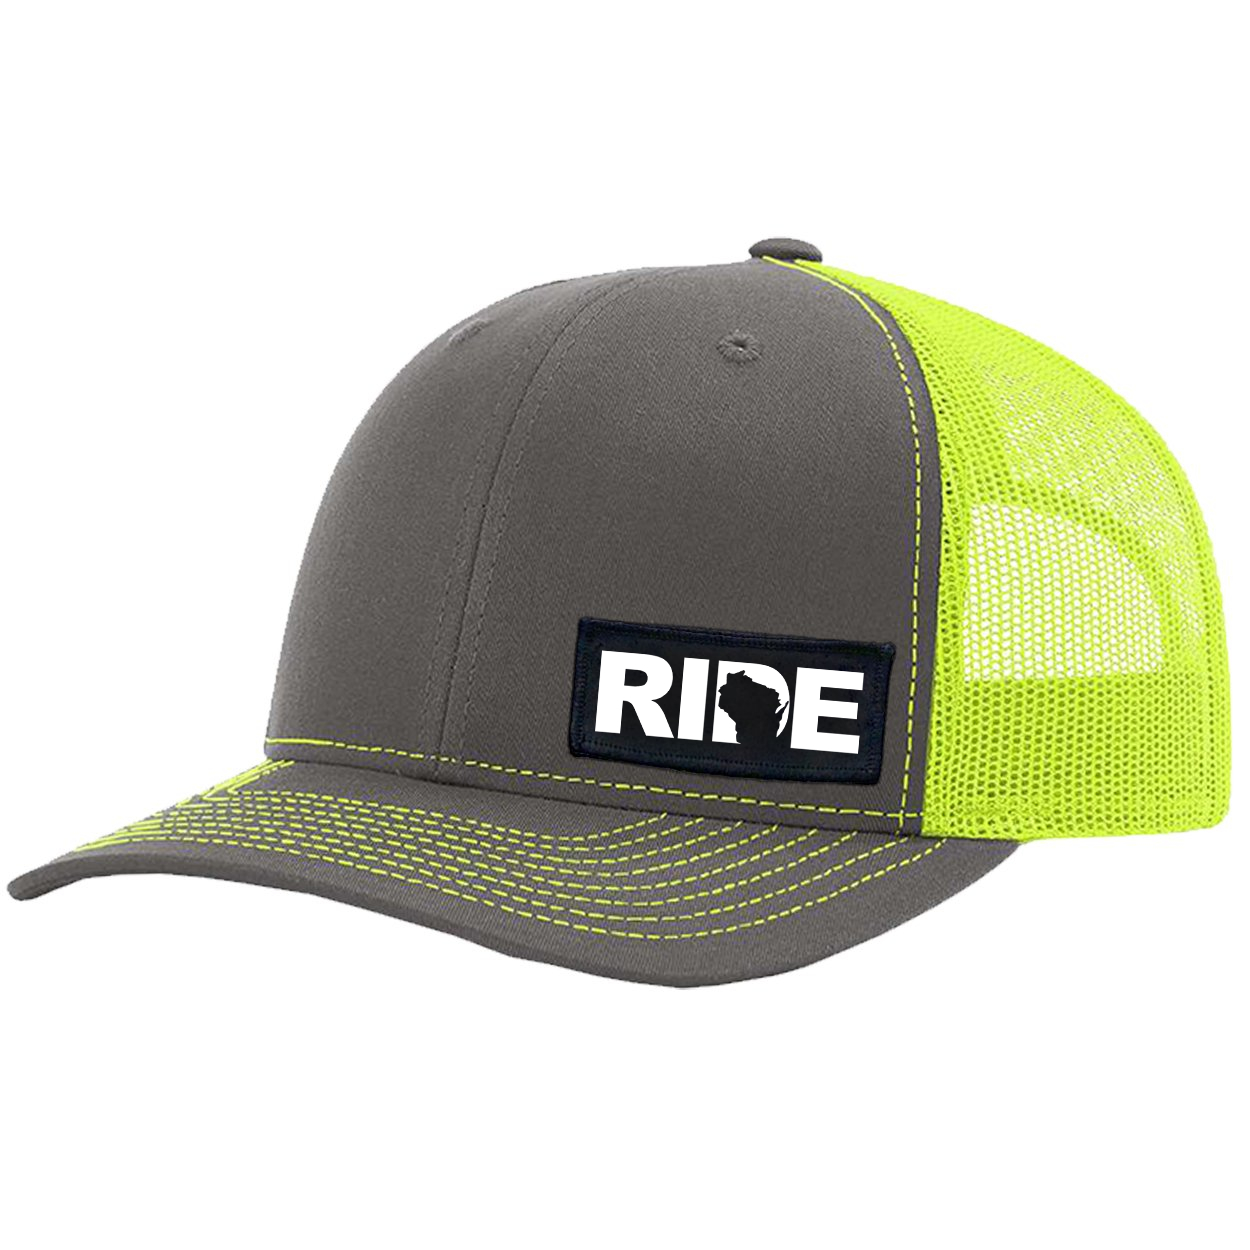 Ride Wisconsin Night Out Woven Patch Snapback Trucker Hat Charcoal/Neon Yellow (White Logo)